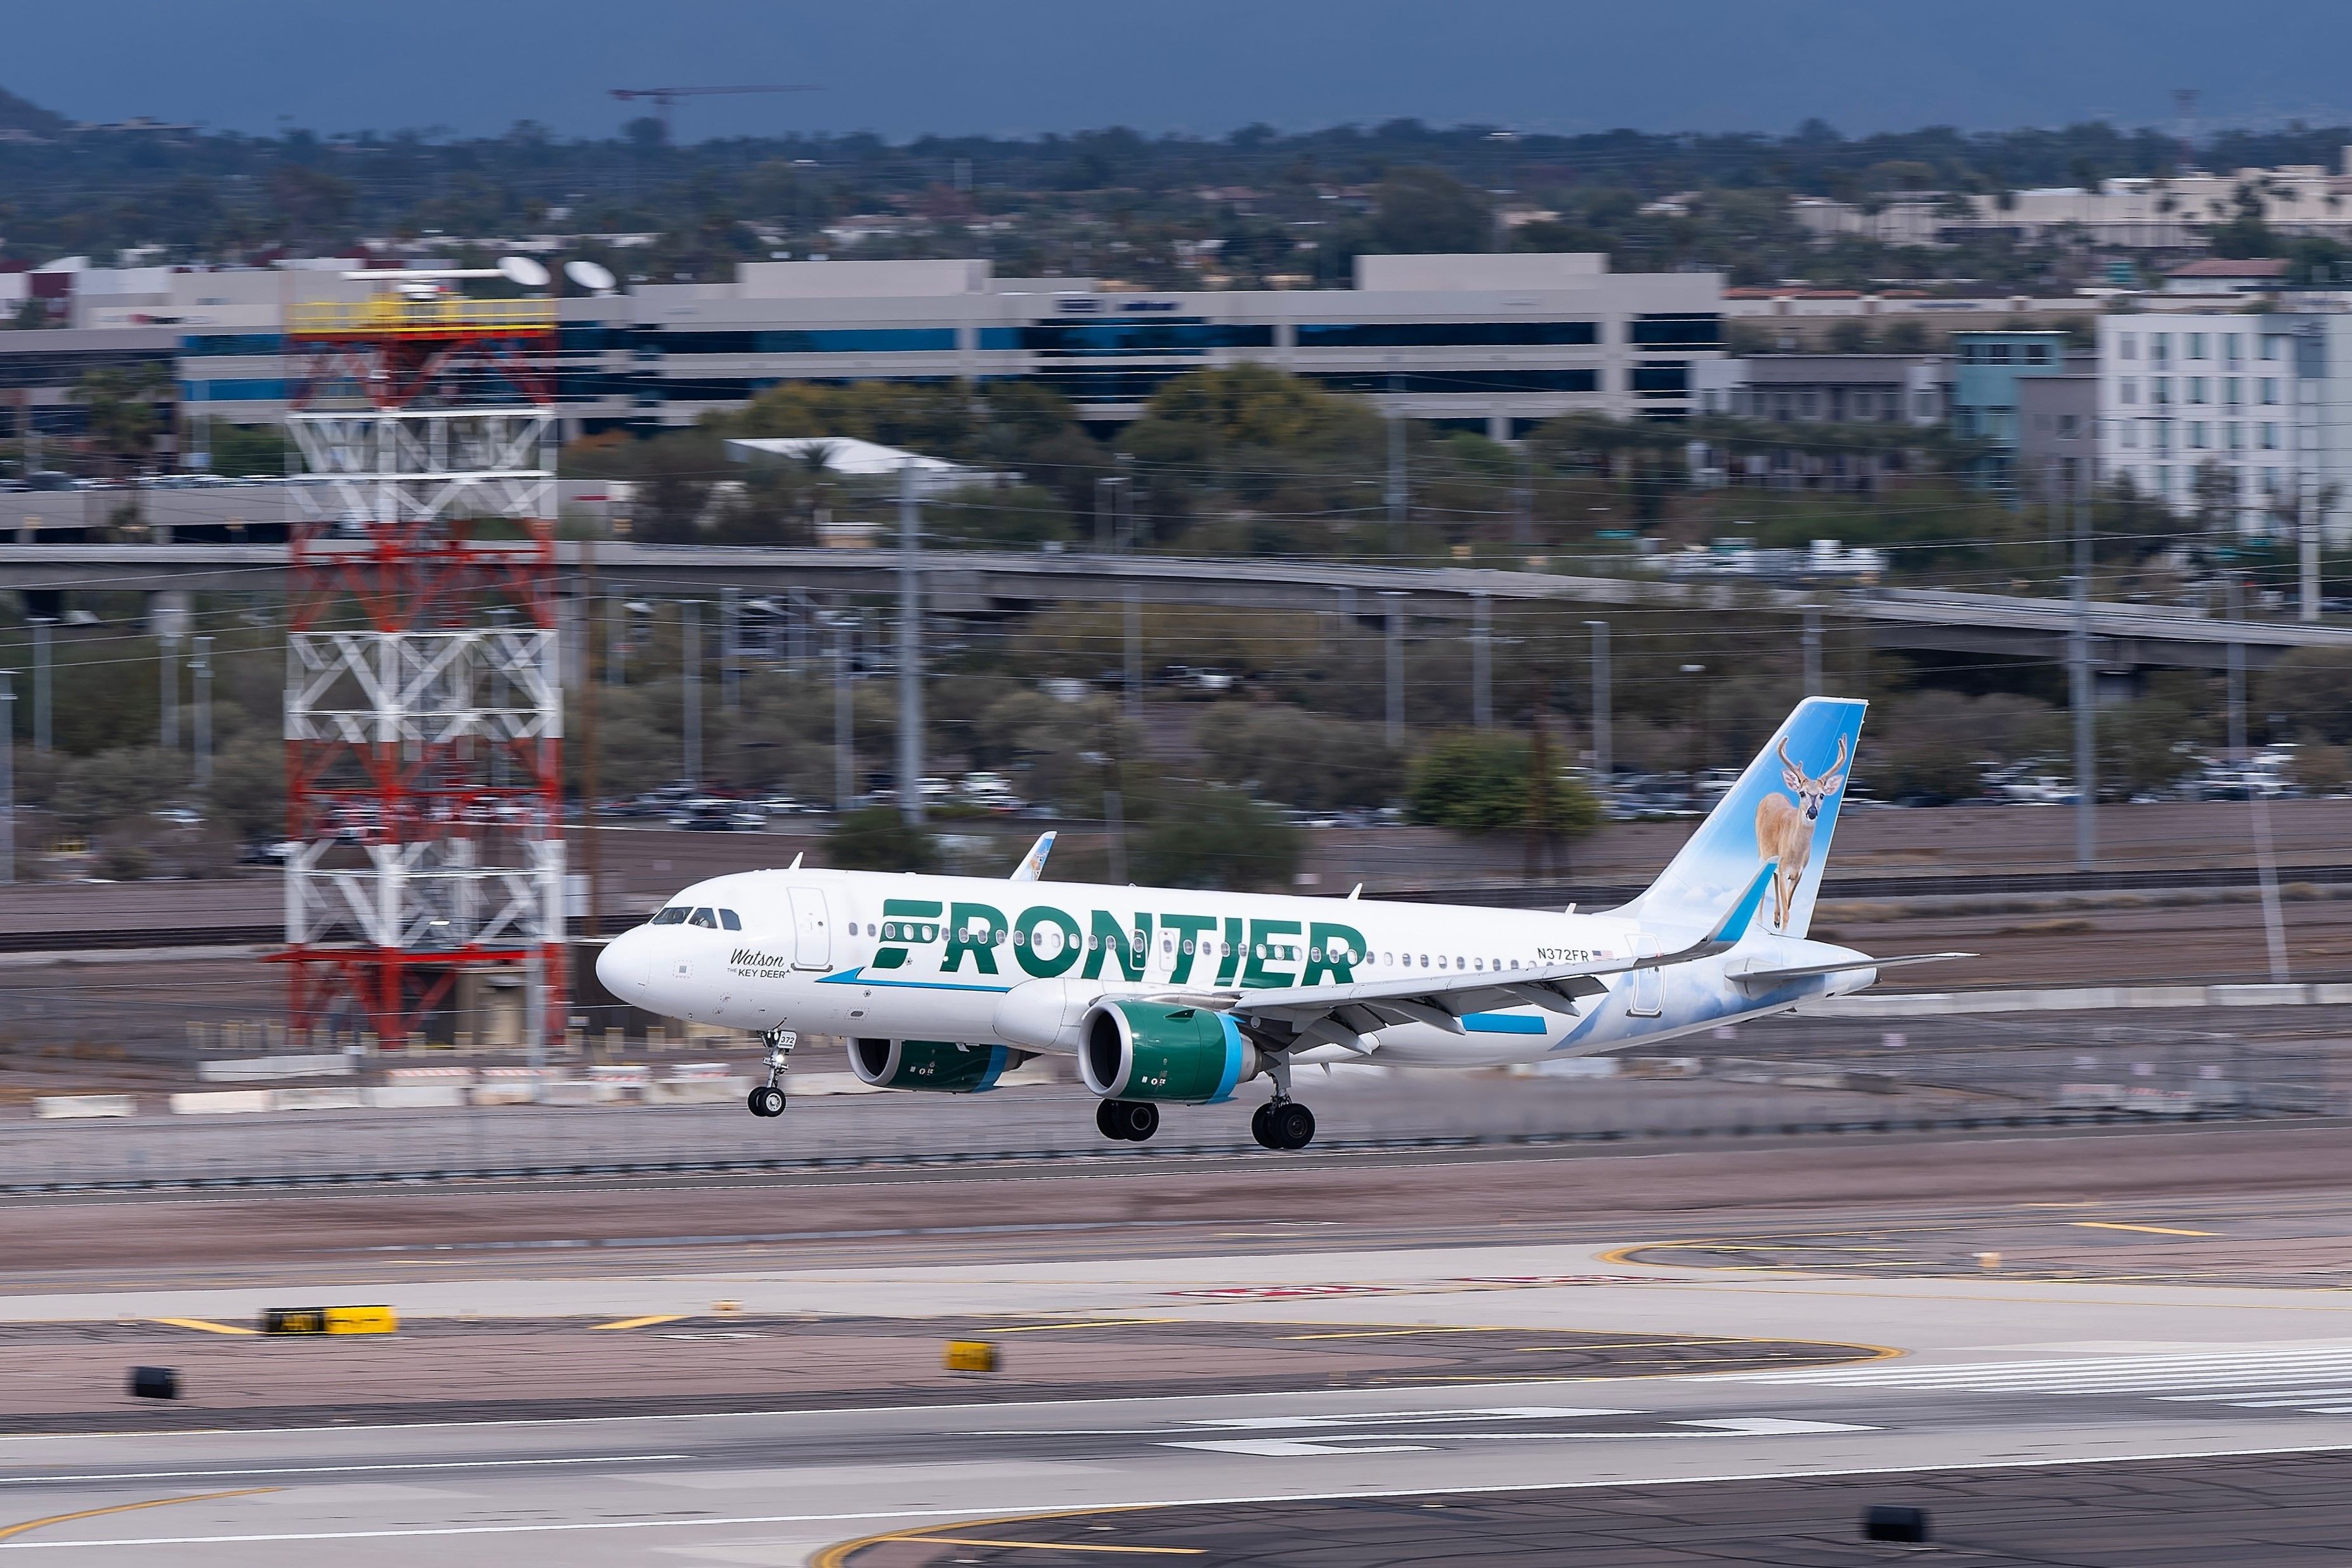 A Frontier Airlines Airbus A320neo abtou to land In Phoenix.